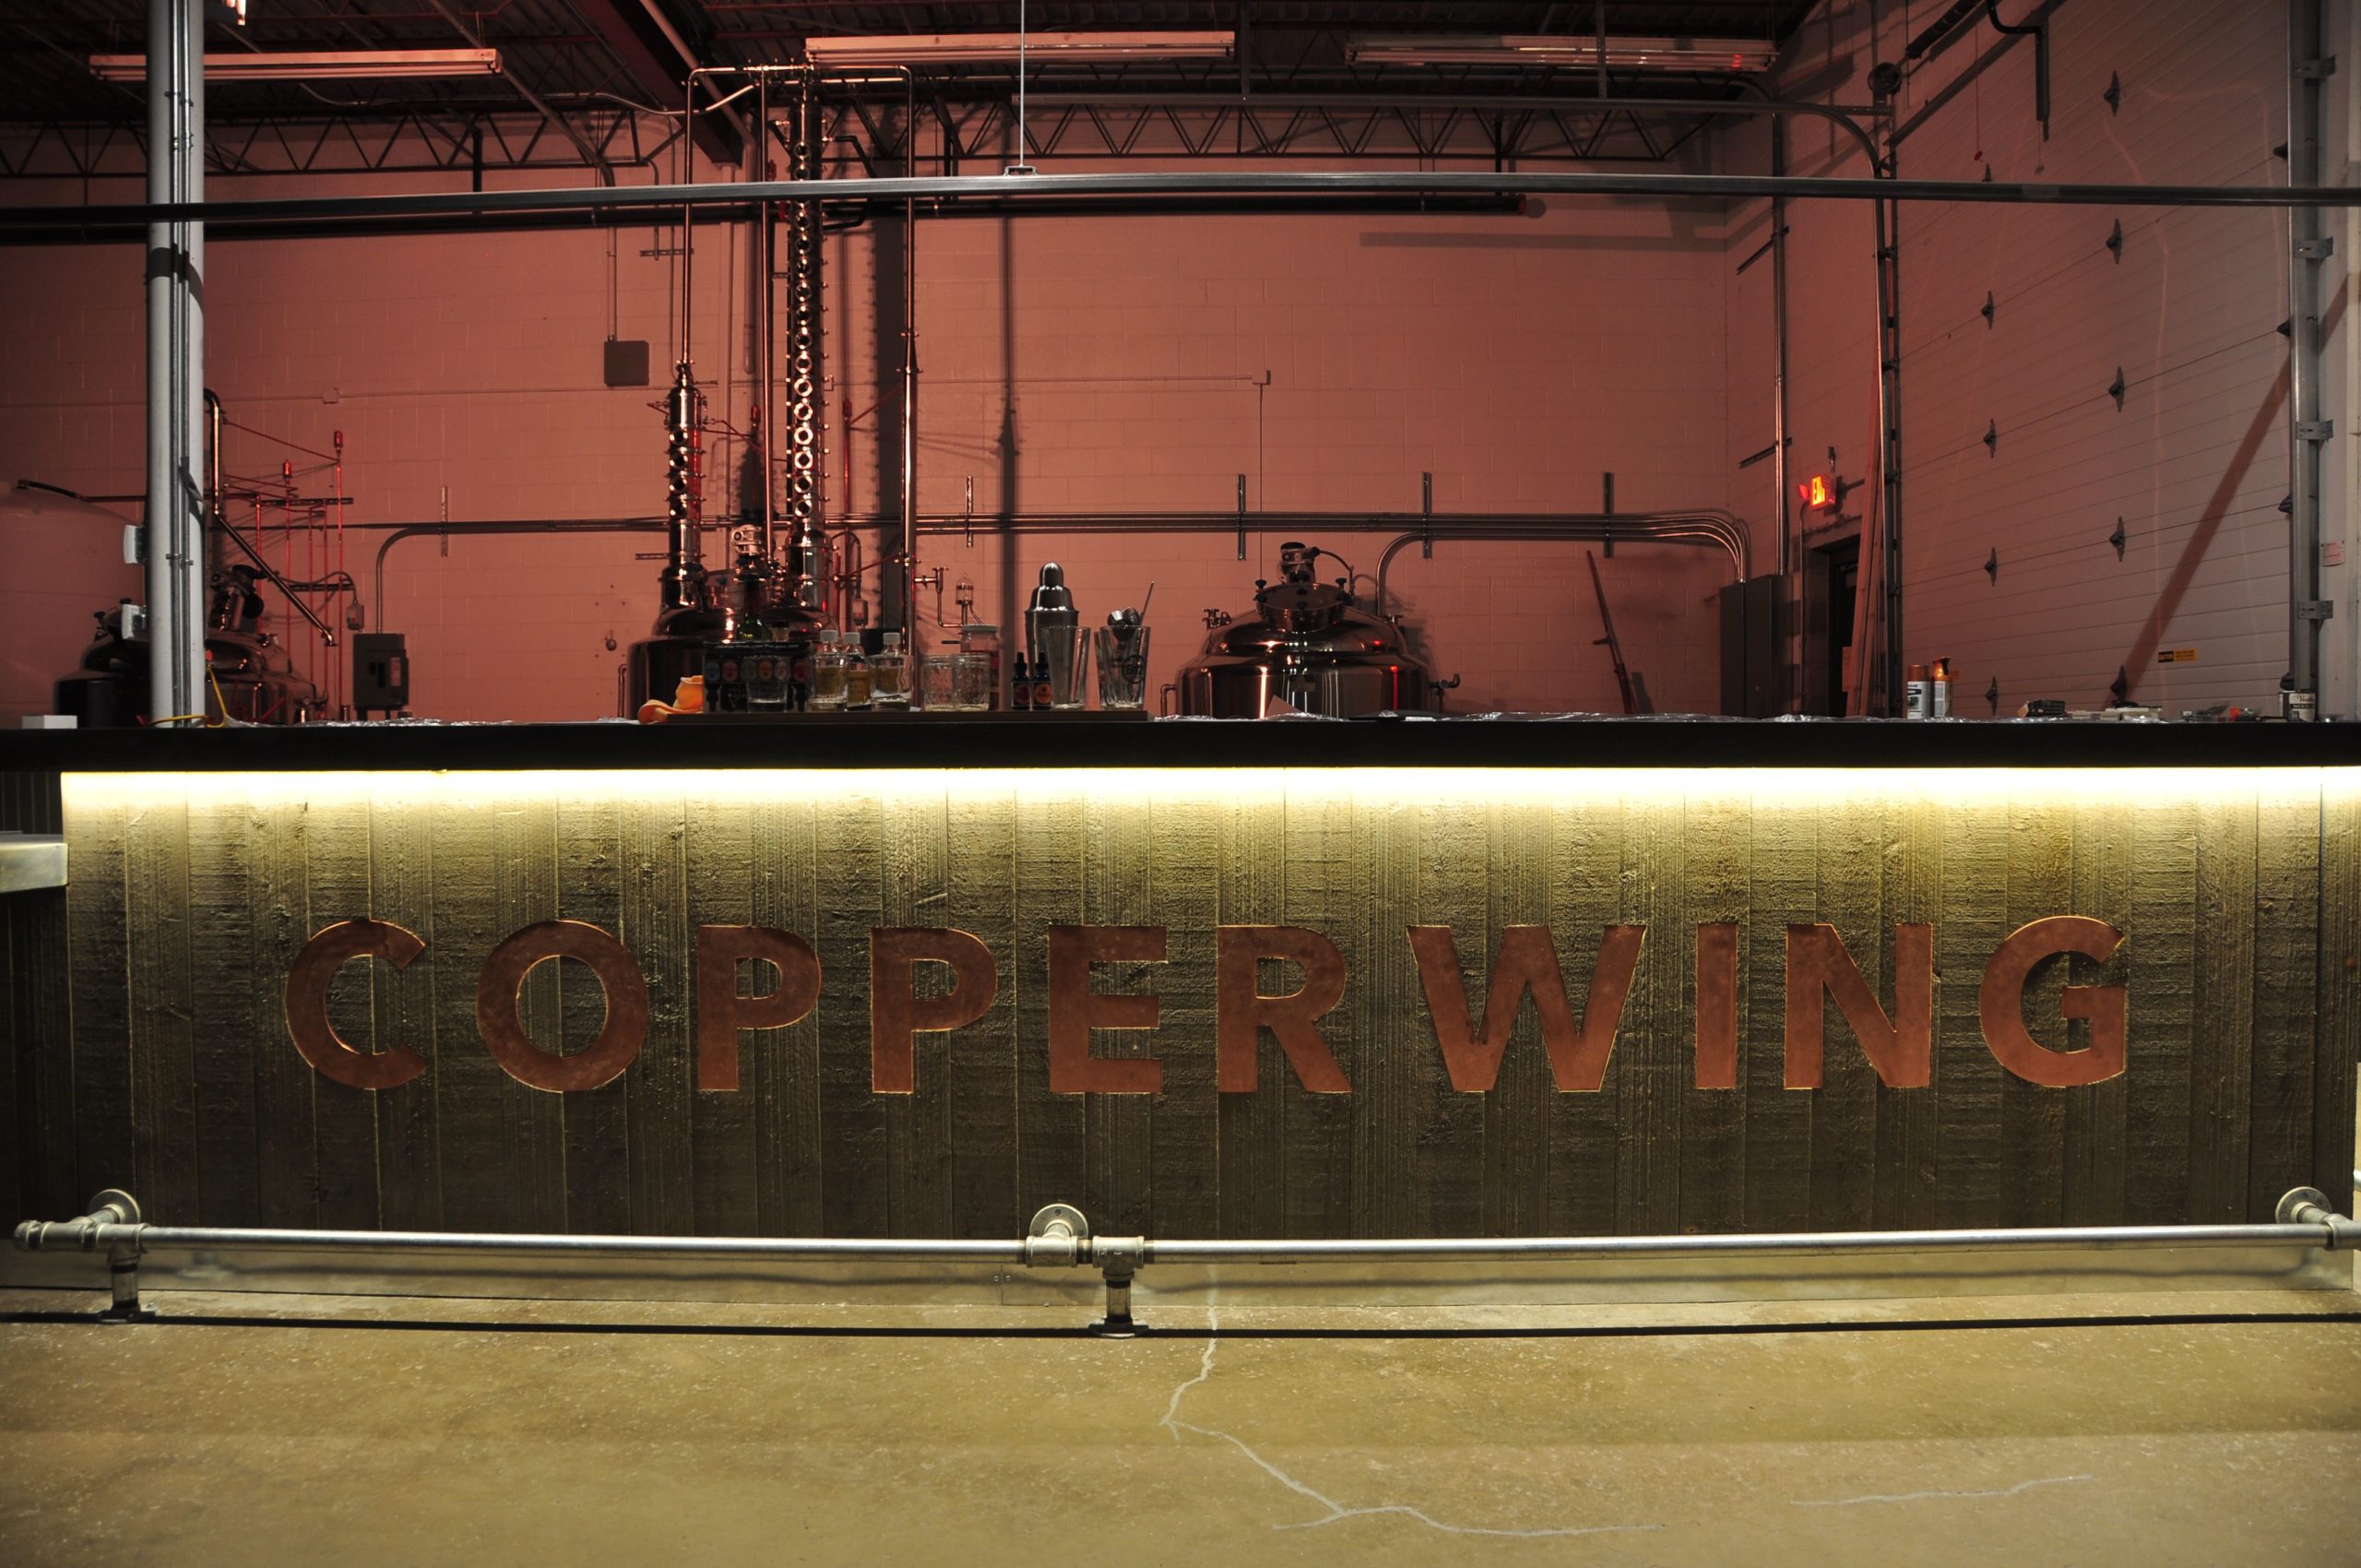 empty bar with the word Copperwing across it